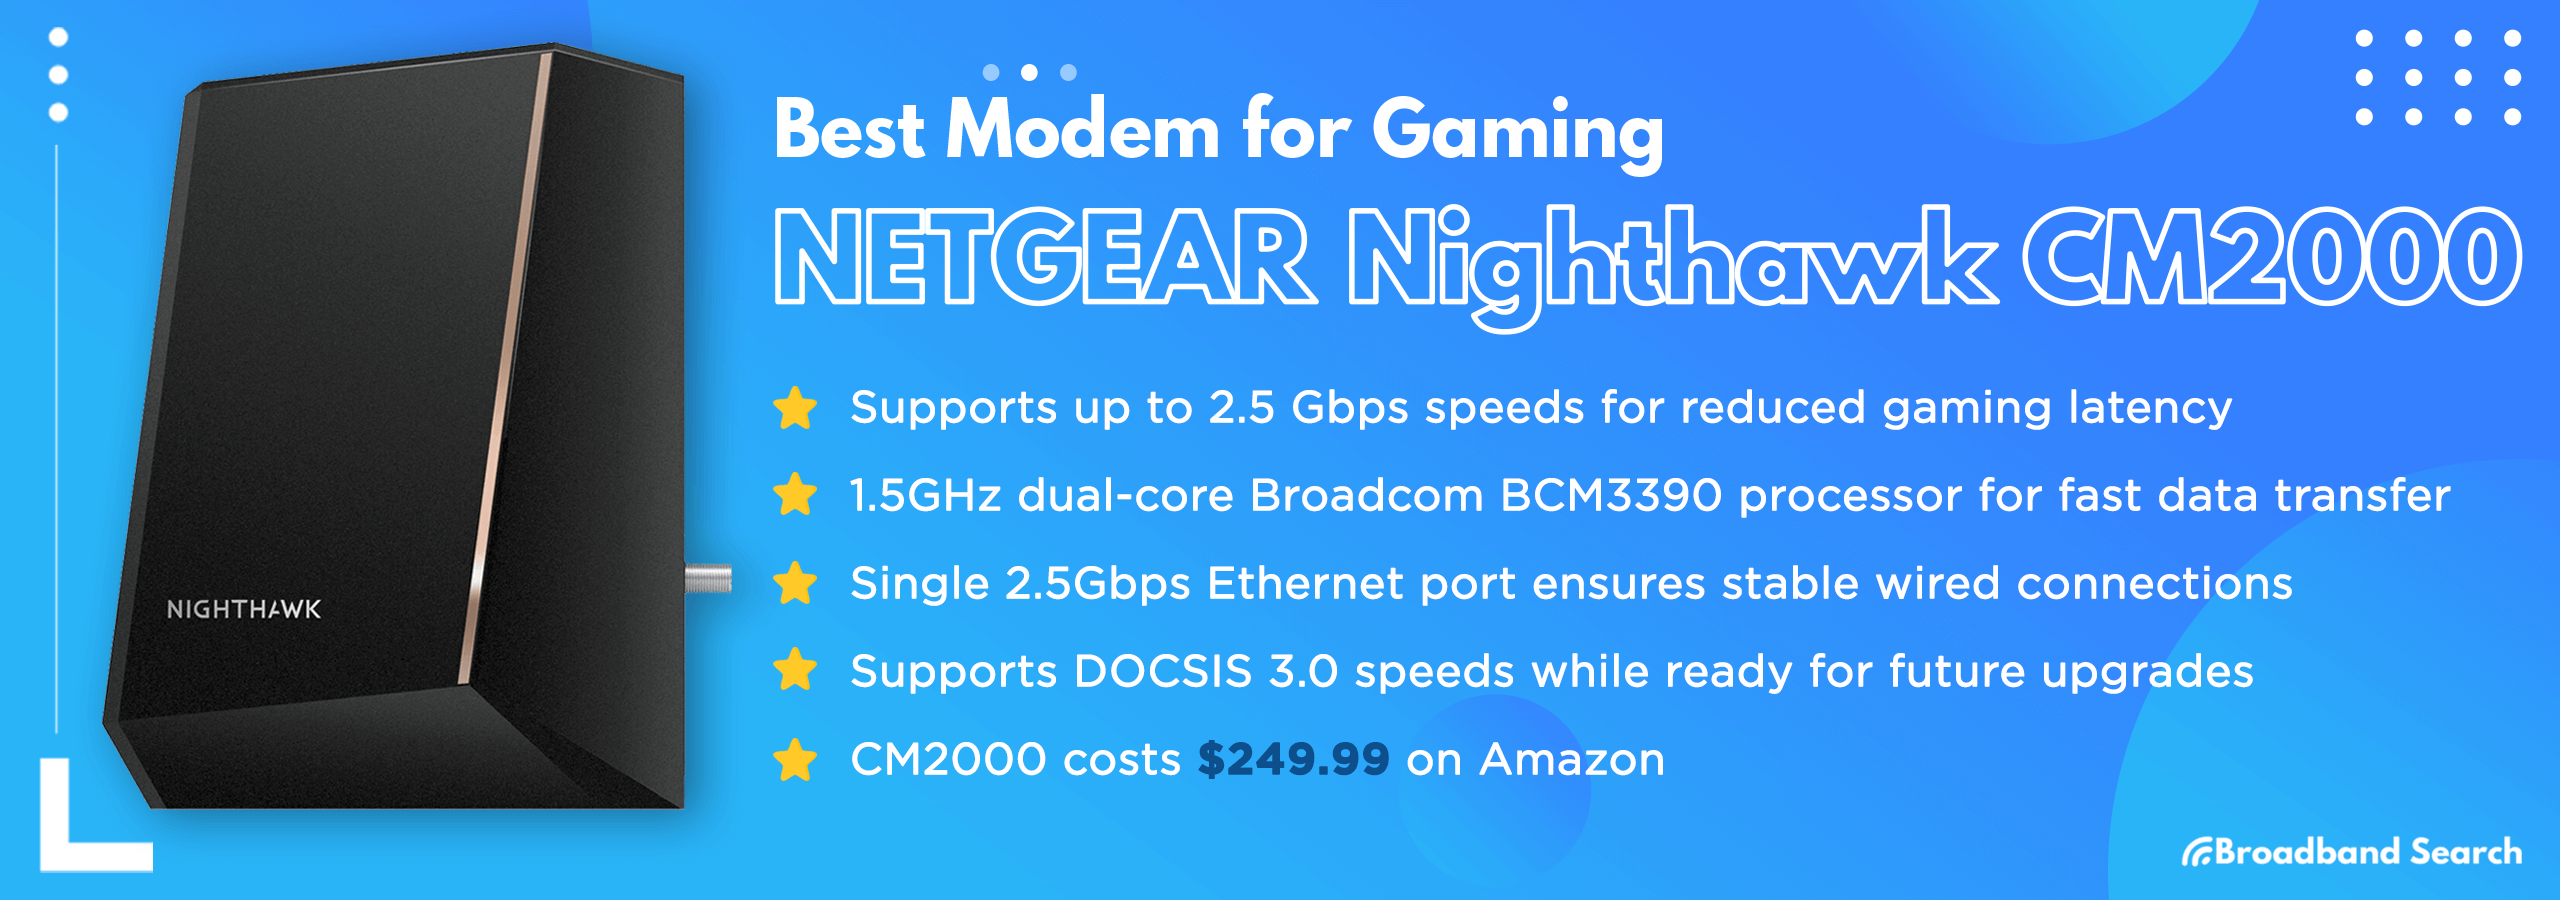 Best Gaming modem, NETGEAR Nighthawk CM2000, with included product details